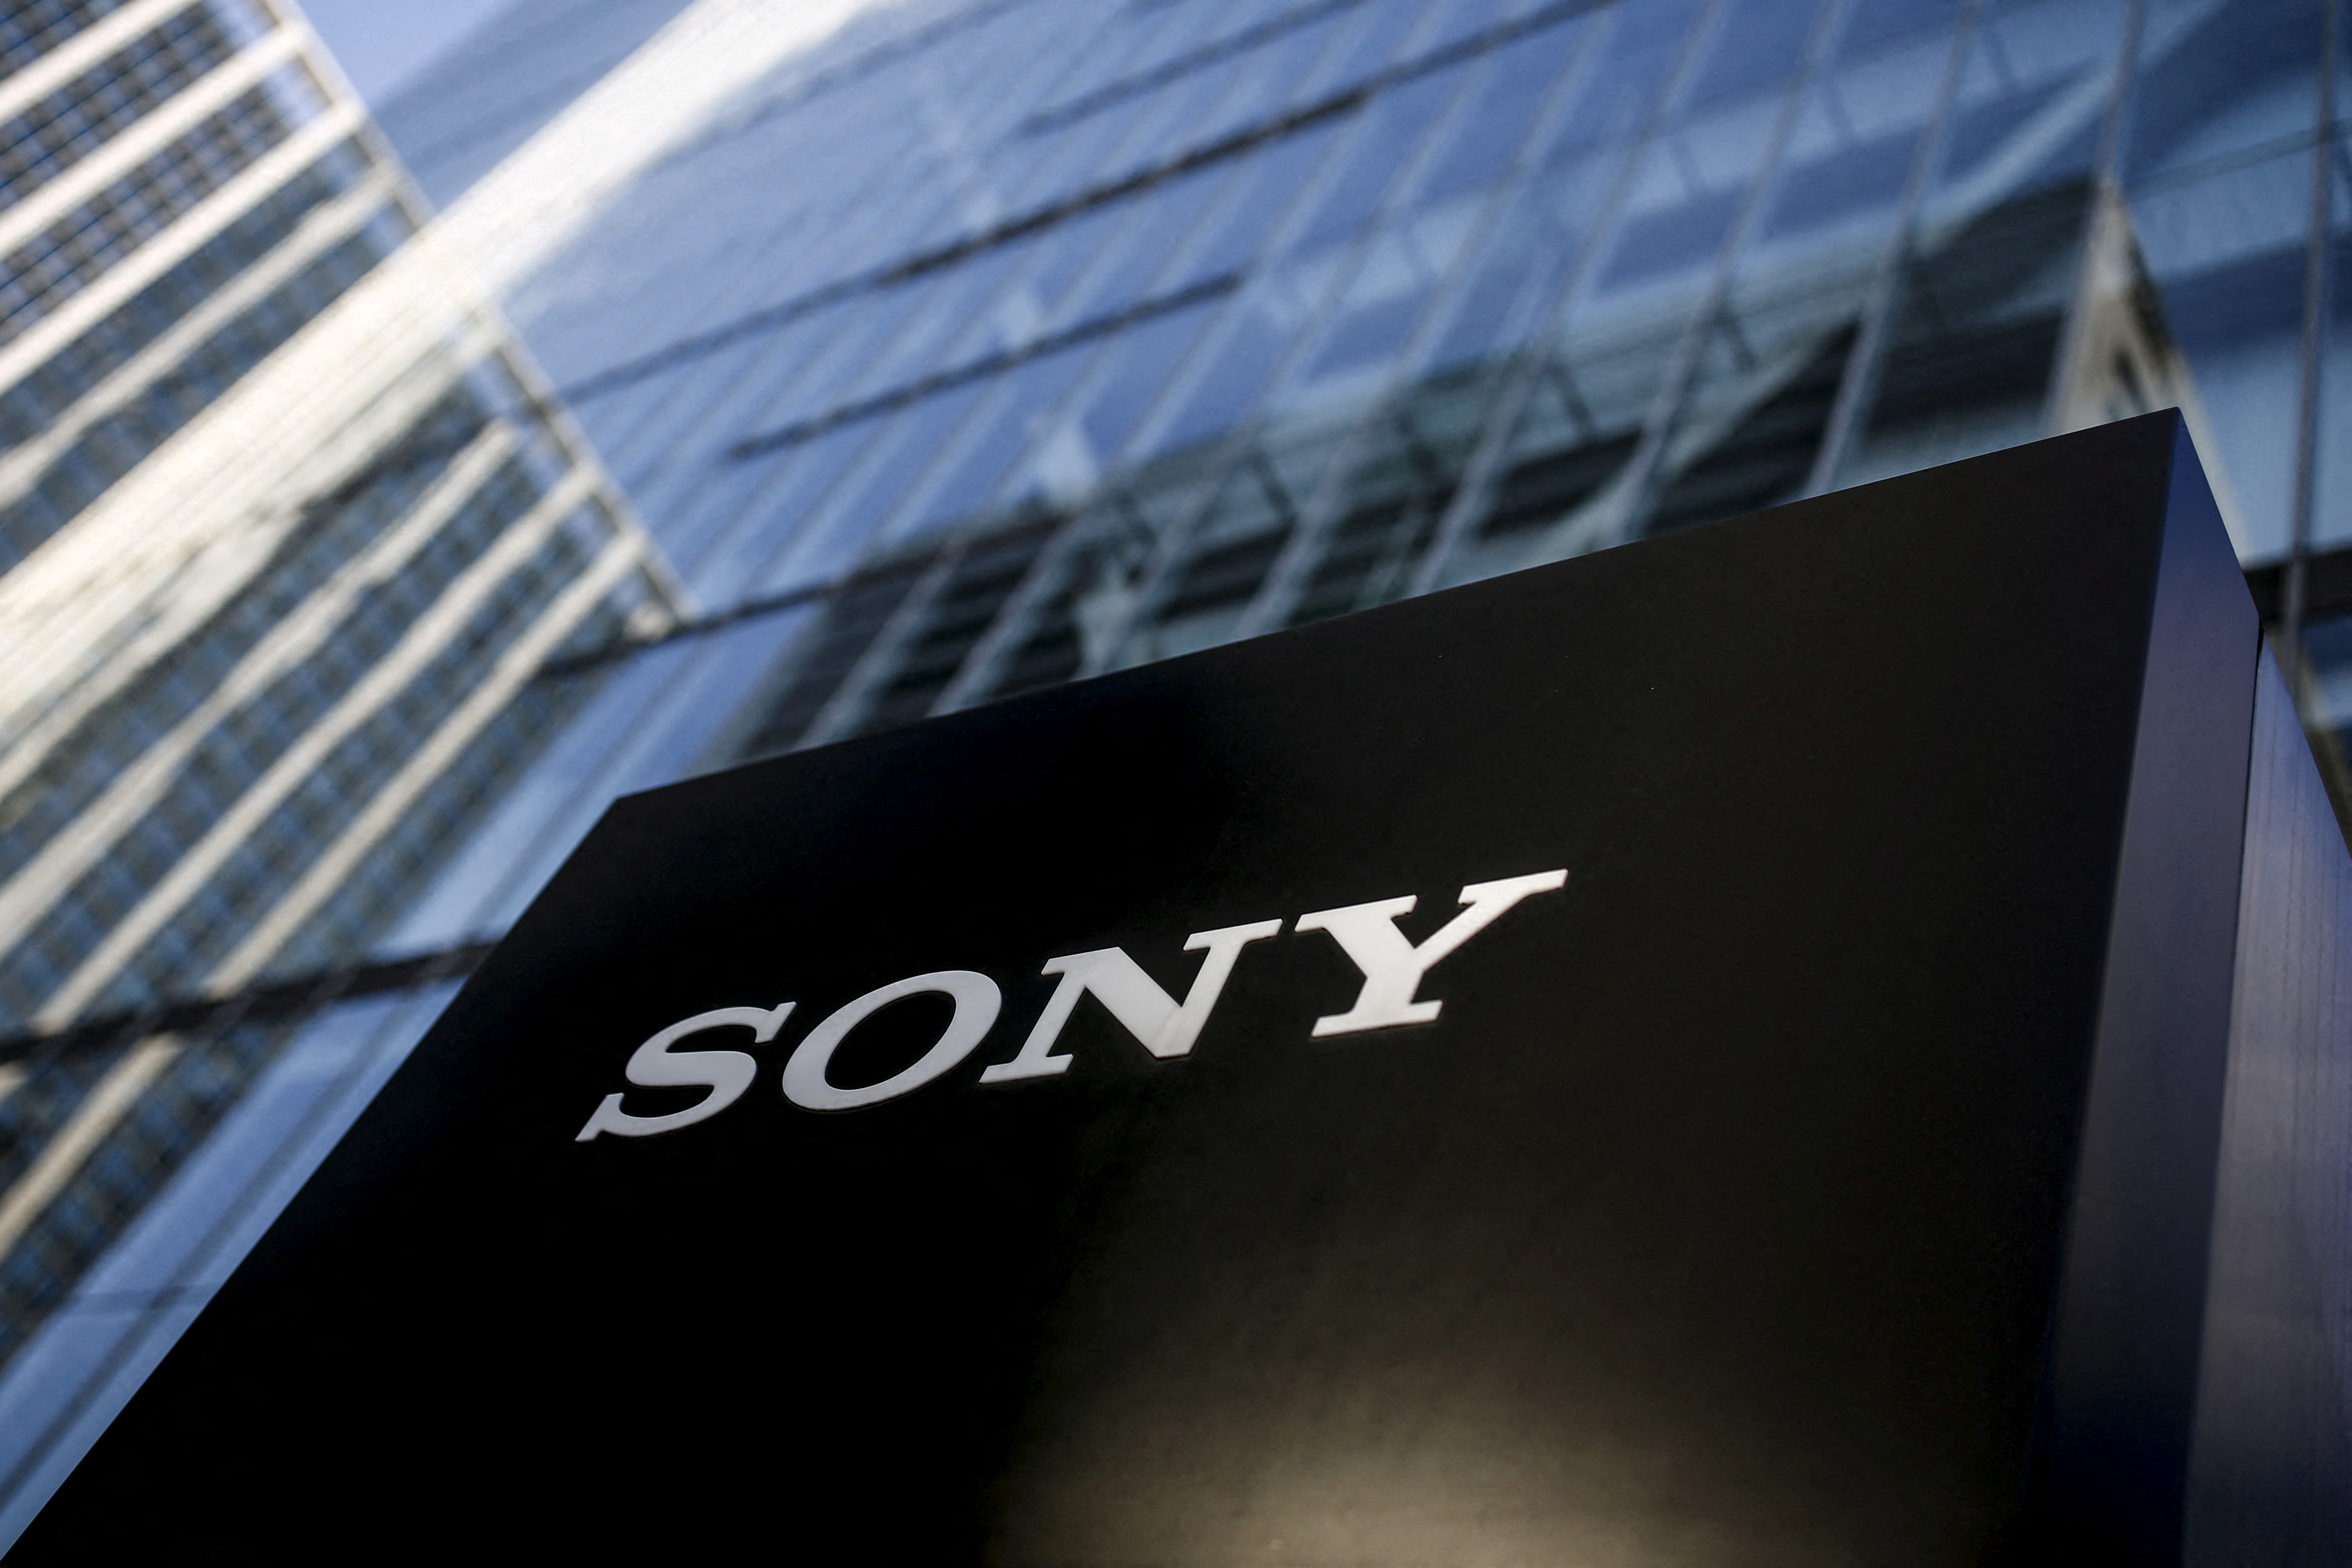 The company logo of Sony Corporation is seen at its headquarters in Tokyo